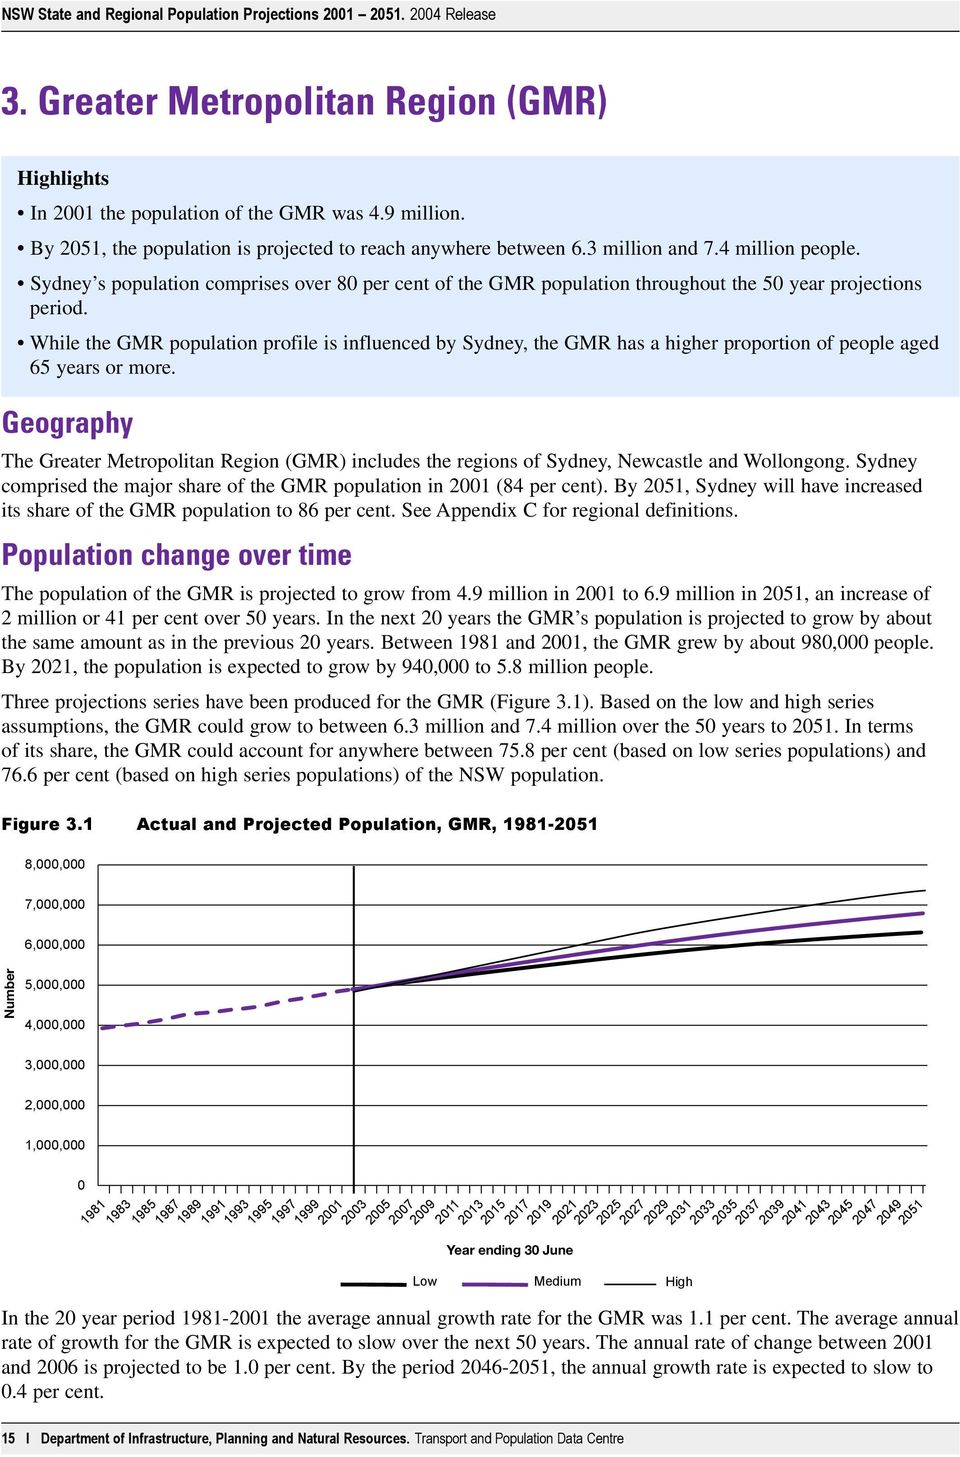 While the GMR population profile is influenced by Sydney, the GMR has a higher proportion of people aged 65 years or more.